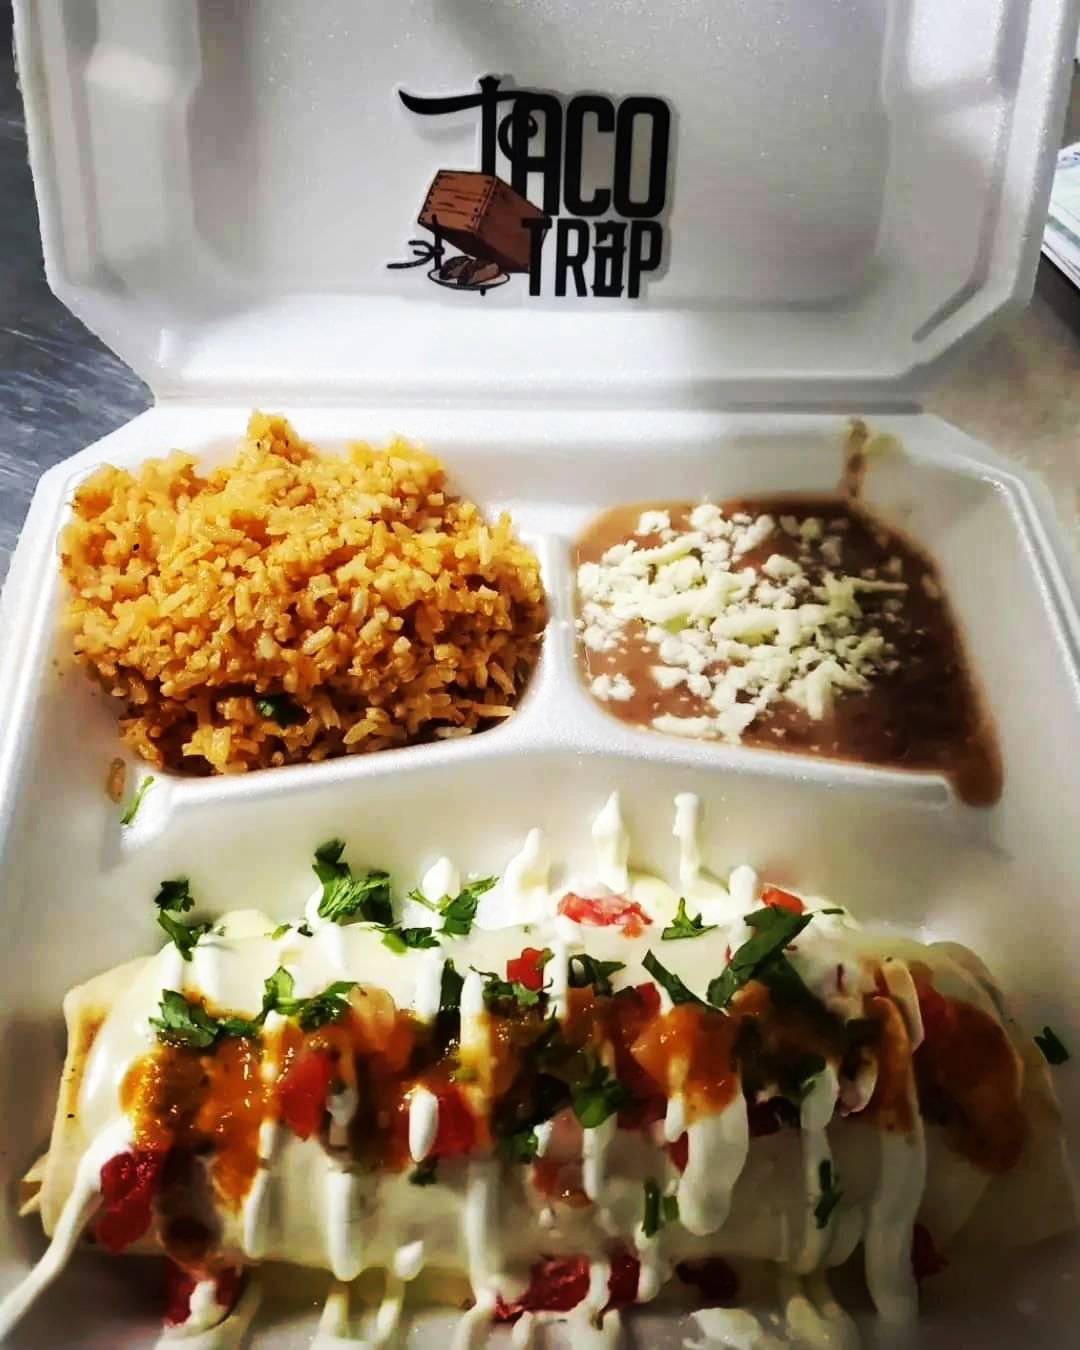 From the @tacotrappsl themselves.... 🌮🌯🤤🤤🤤

&quot;Yall don't sleep on us or this wet burrito!!! Come check us out for #foodtruckfridays from 7-11 at @vineandbarley&quot;

Hope to see you this evening!